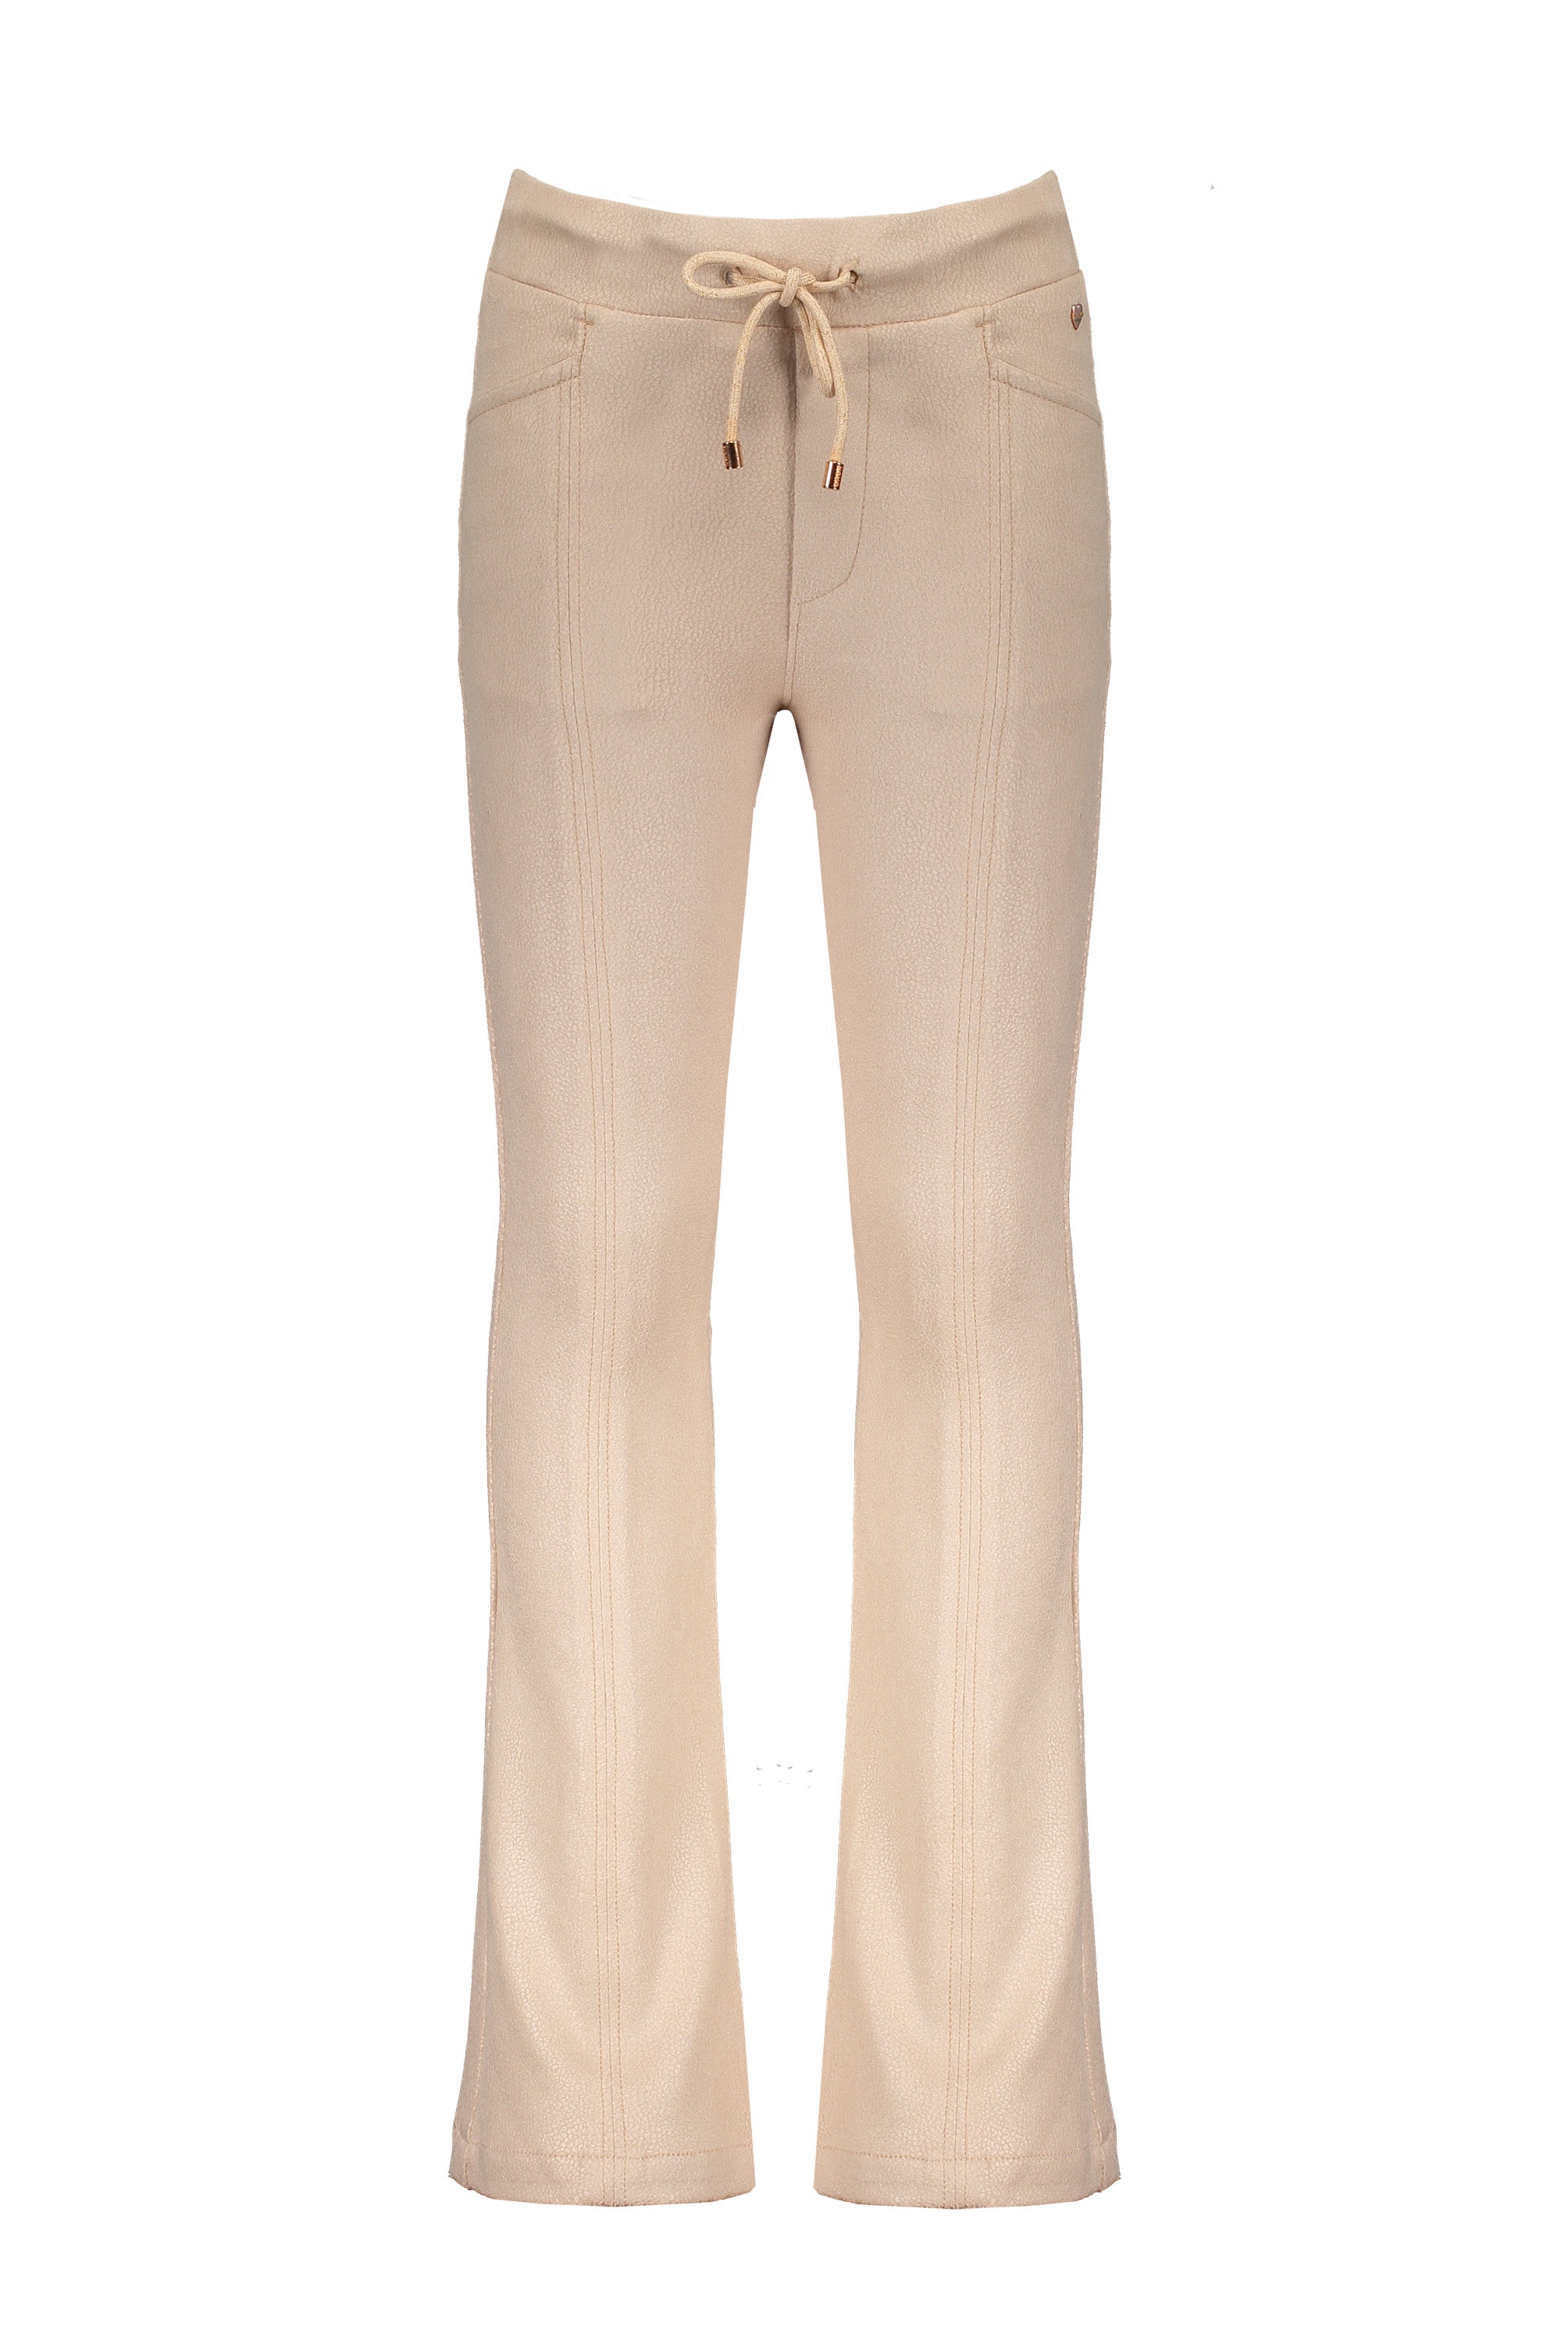 Meisjes Sahara flared pants with cut and sew details at front leg van NoNo in de kleur Rosy Sand in maat 146/152.